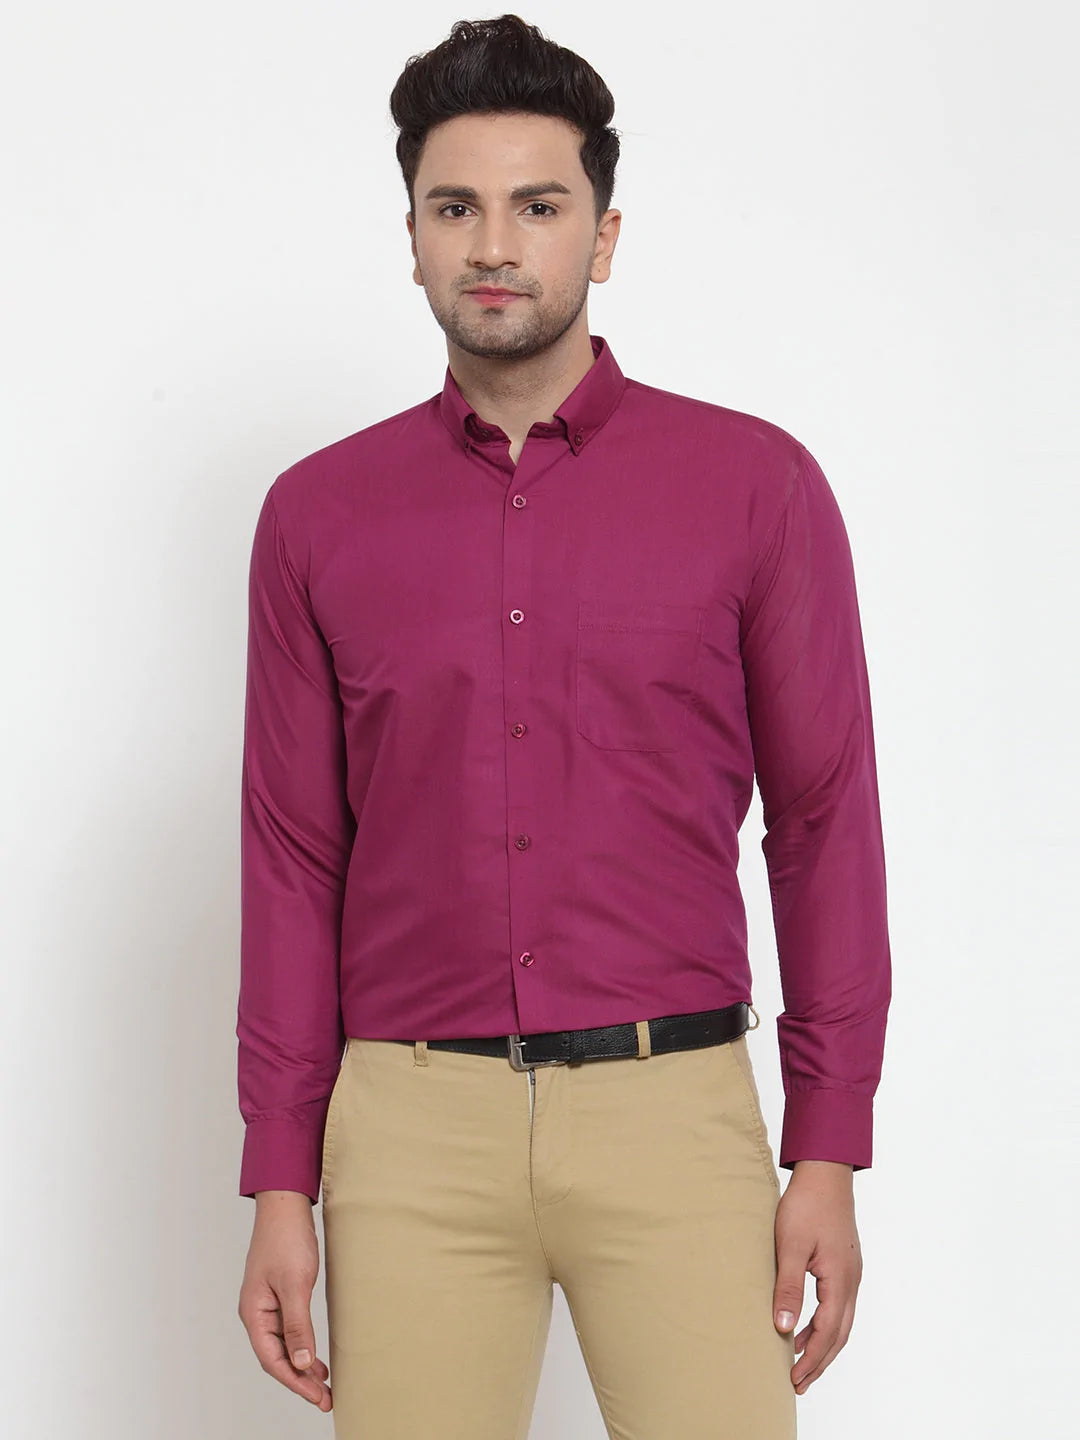 Jainish Red Men's Cotton Solid Button Down Formal Shirts ( SF 713Magenta )